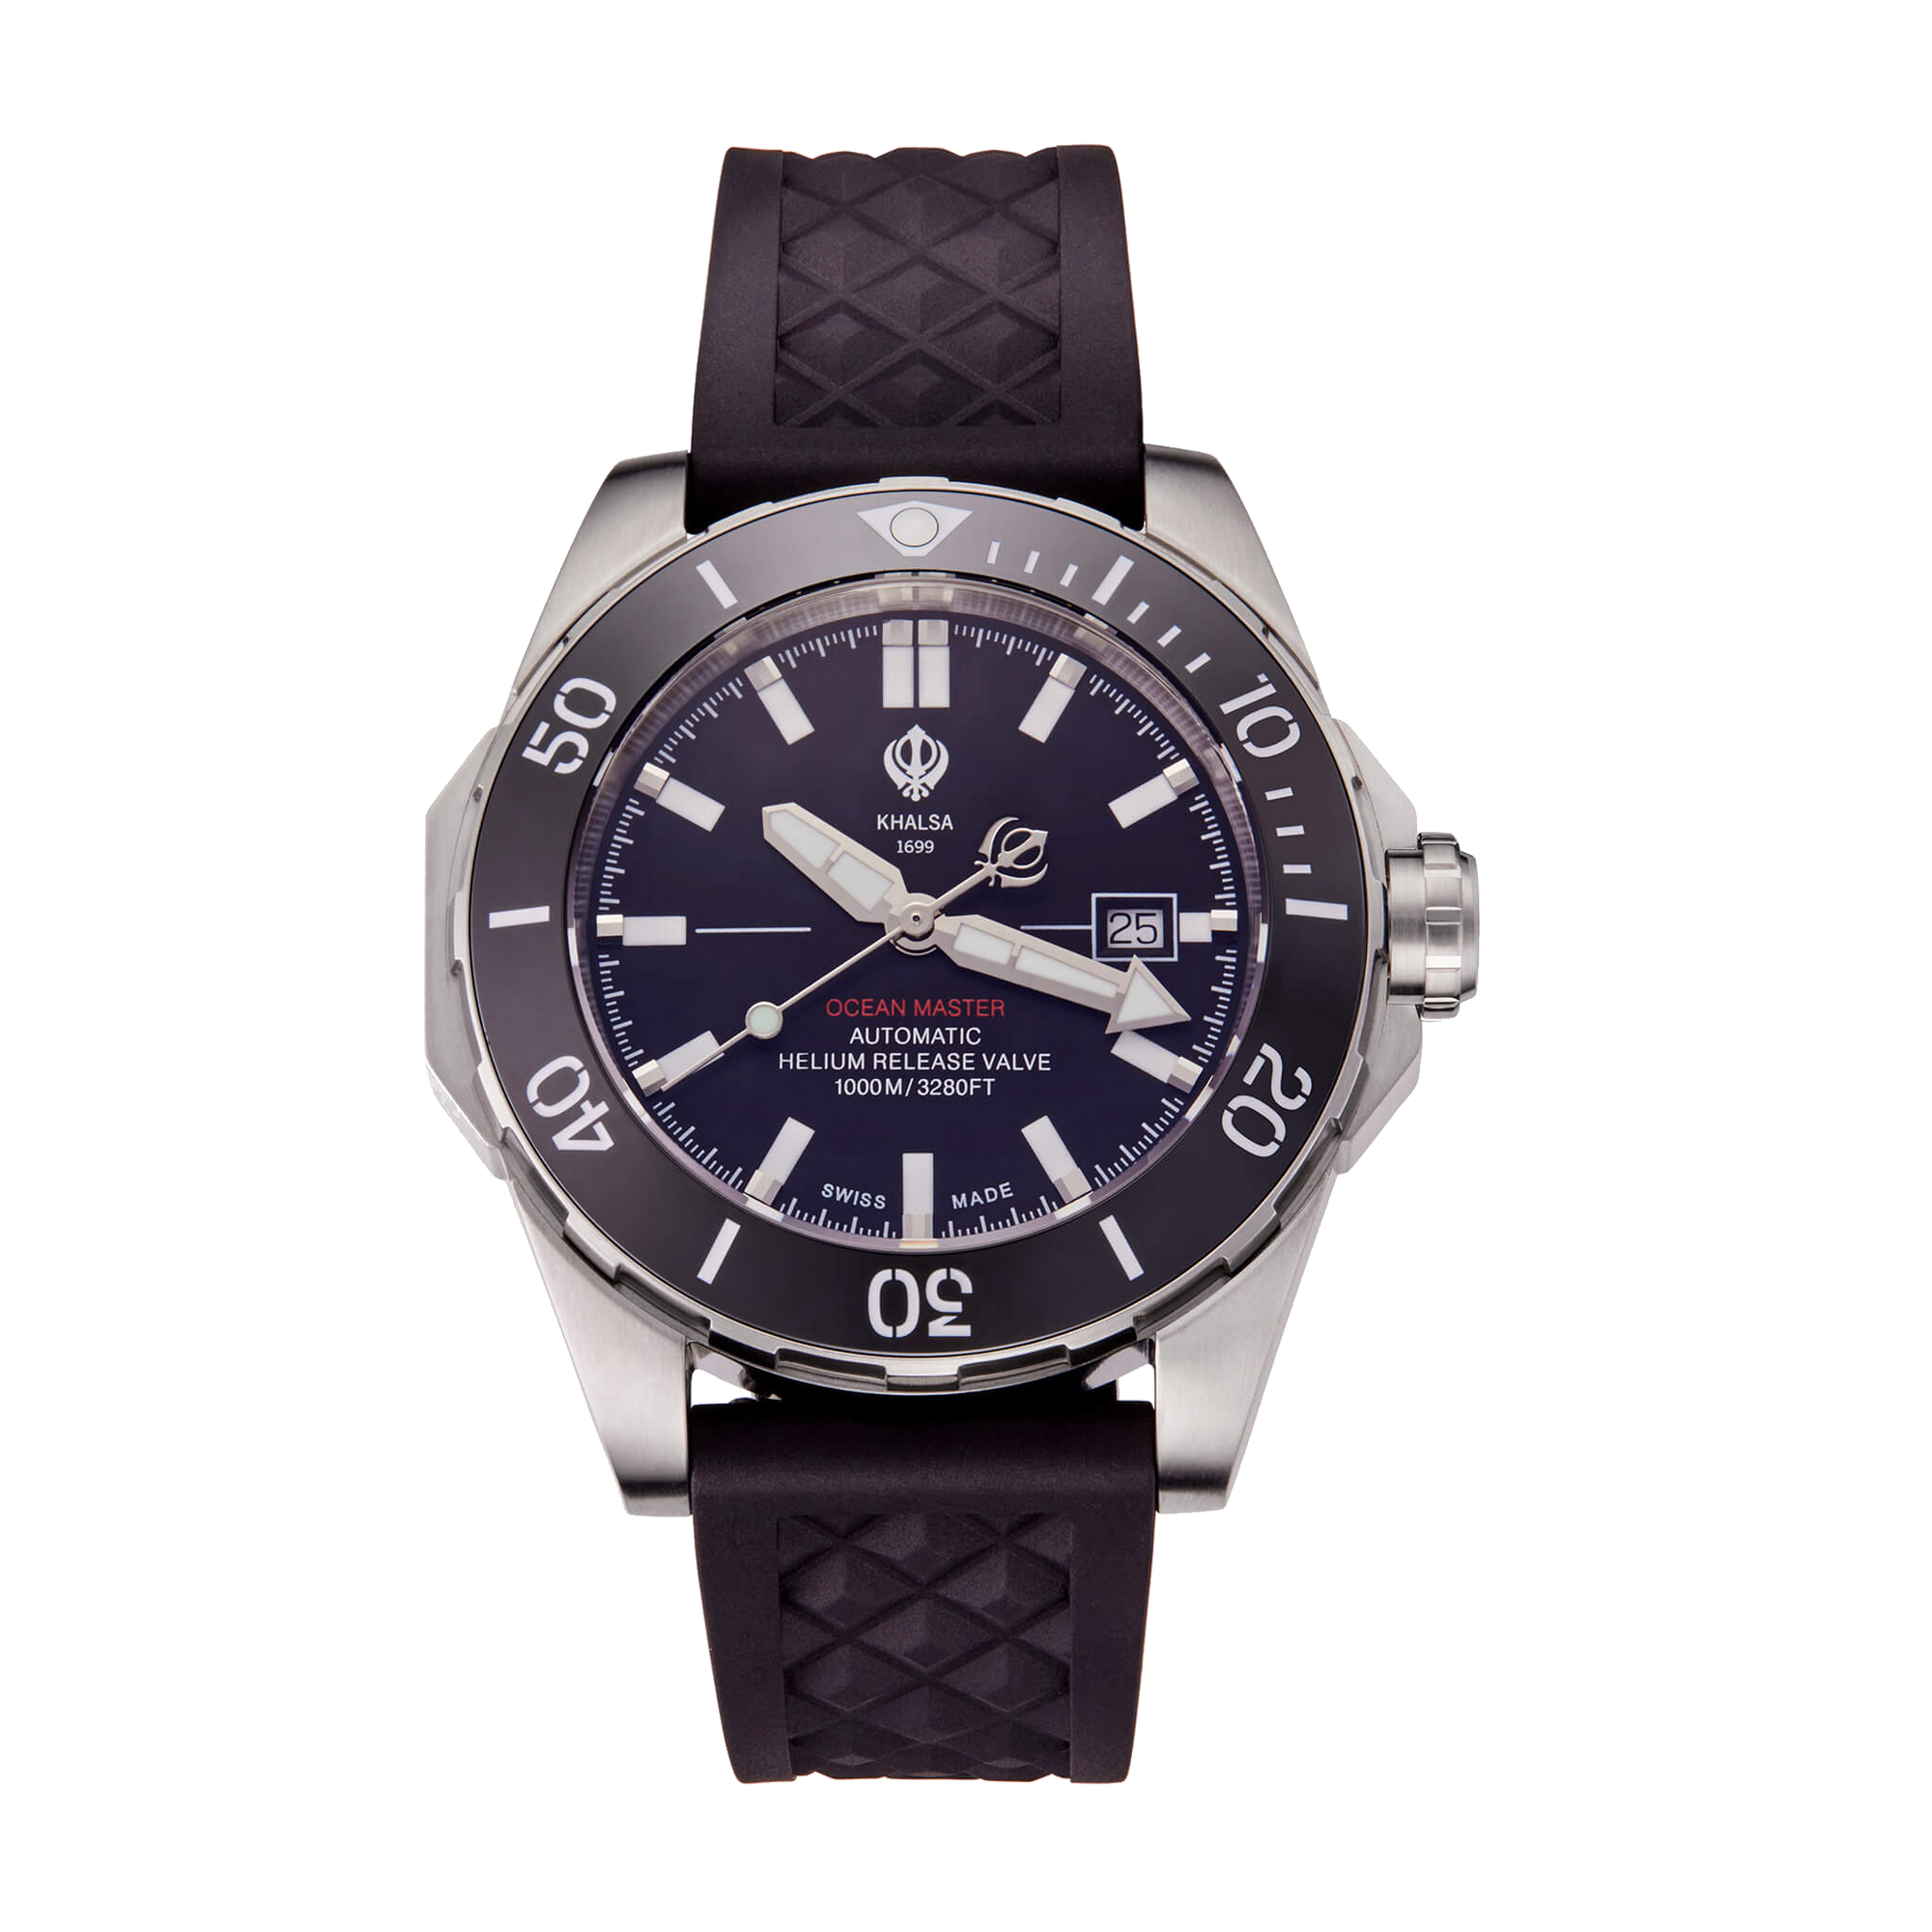 Luxury Obsidian Night Black Swiss Dive Watch for the Modern Sikh with Khanda Symbol and Black Genuine Leather Strap